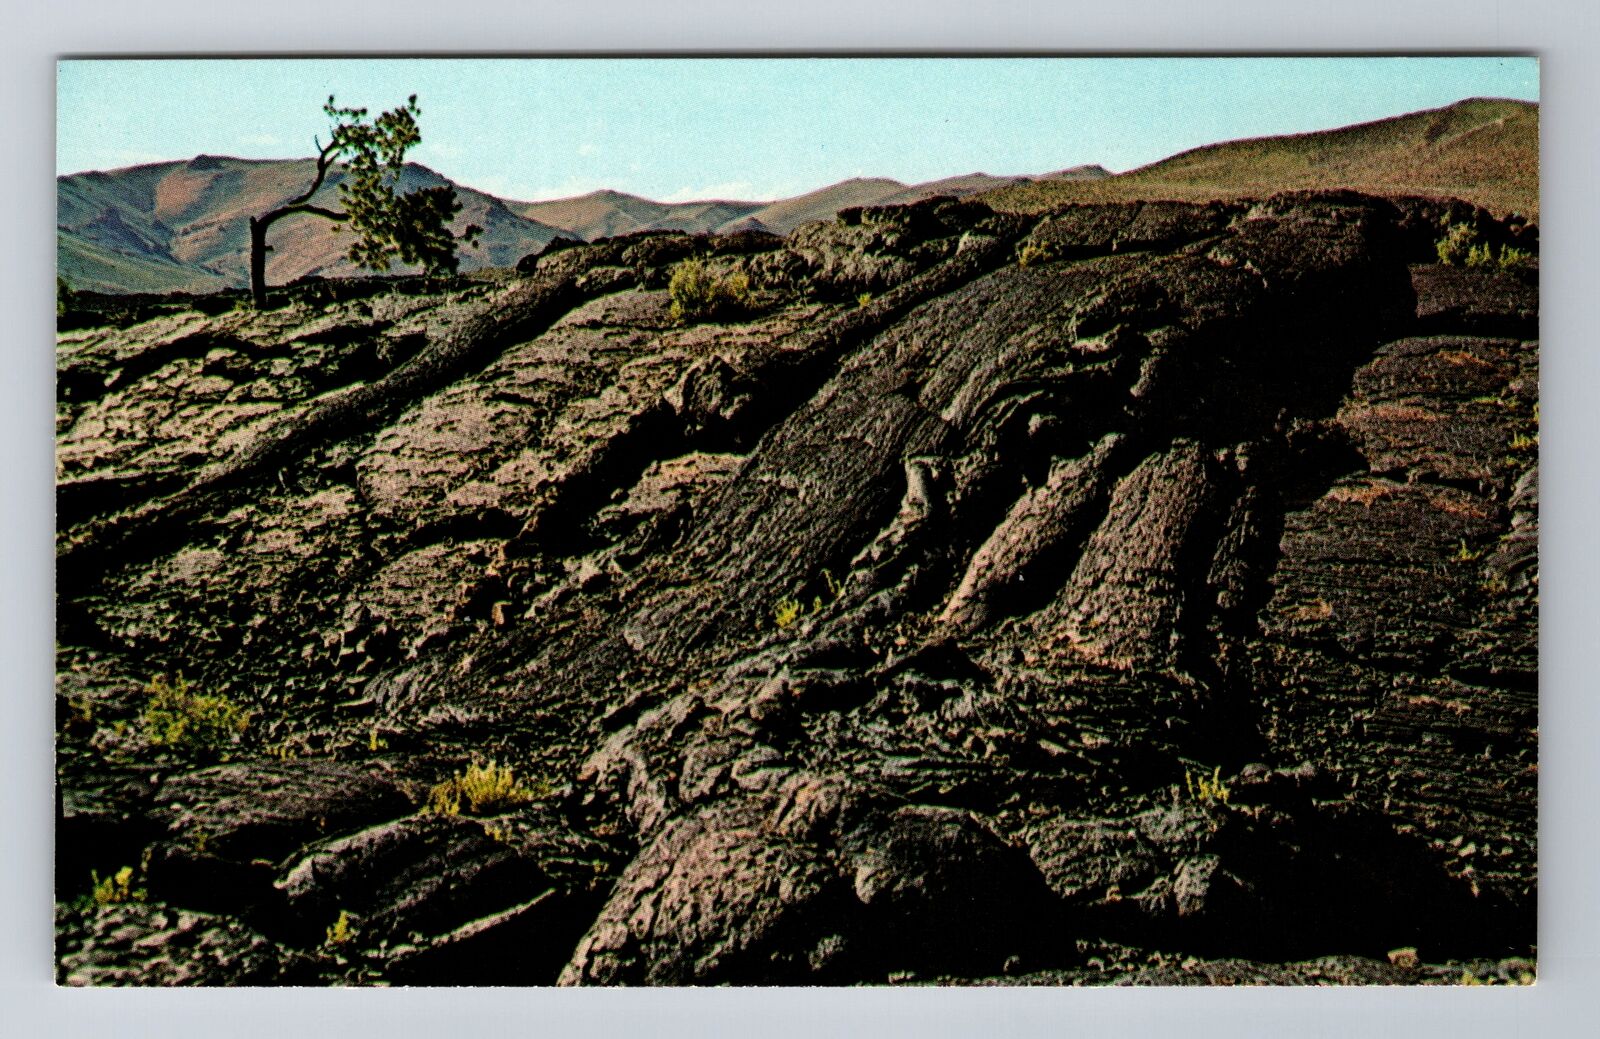 Craters of the Moon ID-Idaho, National Monument, Antique Vintage Postcard